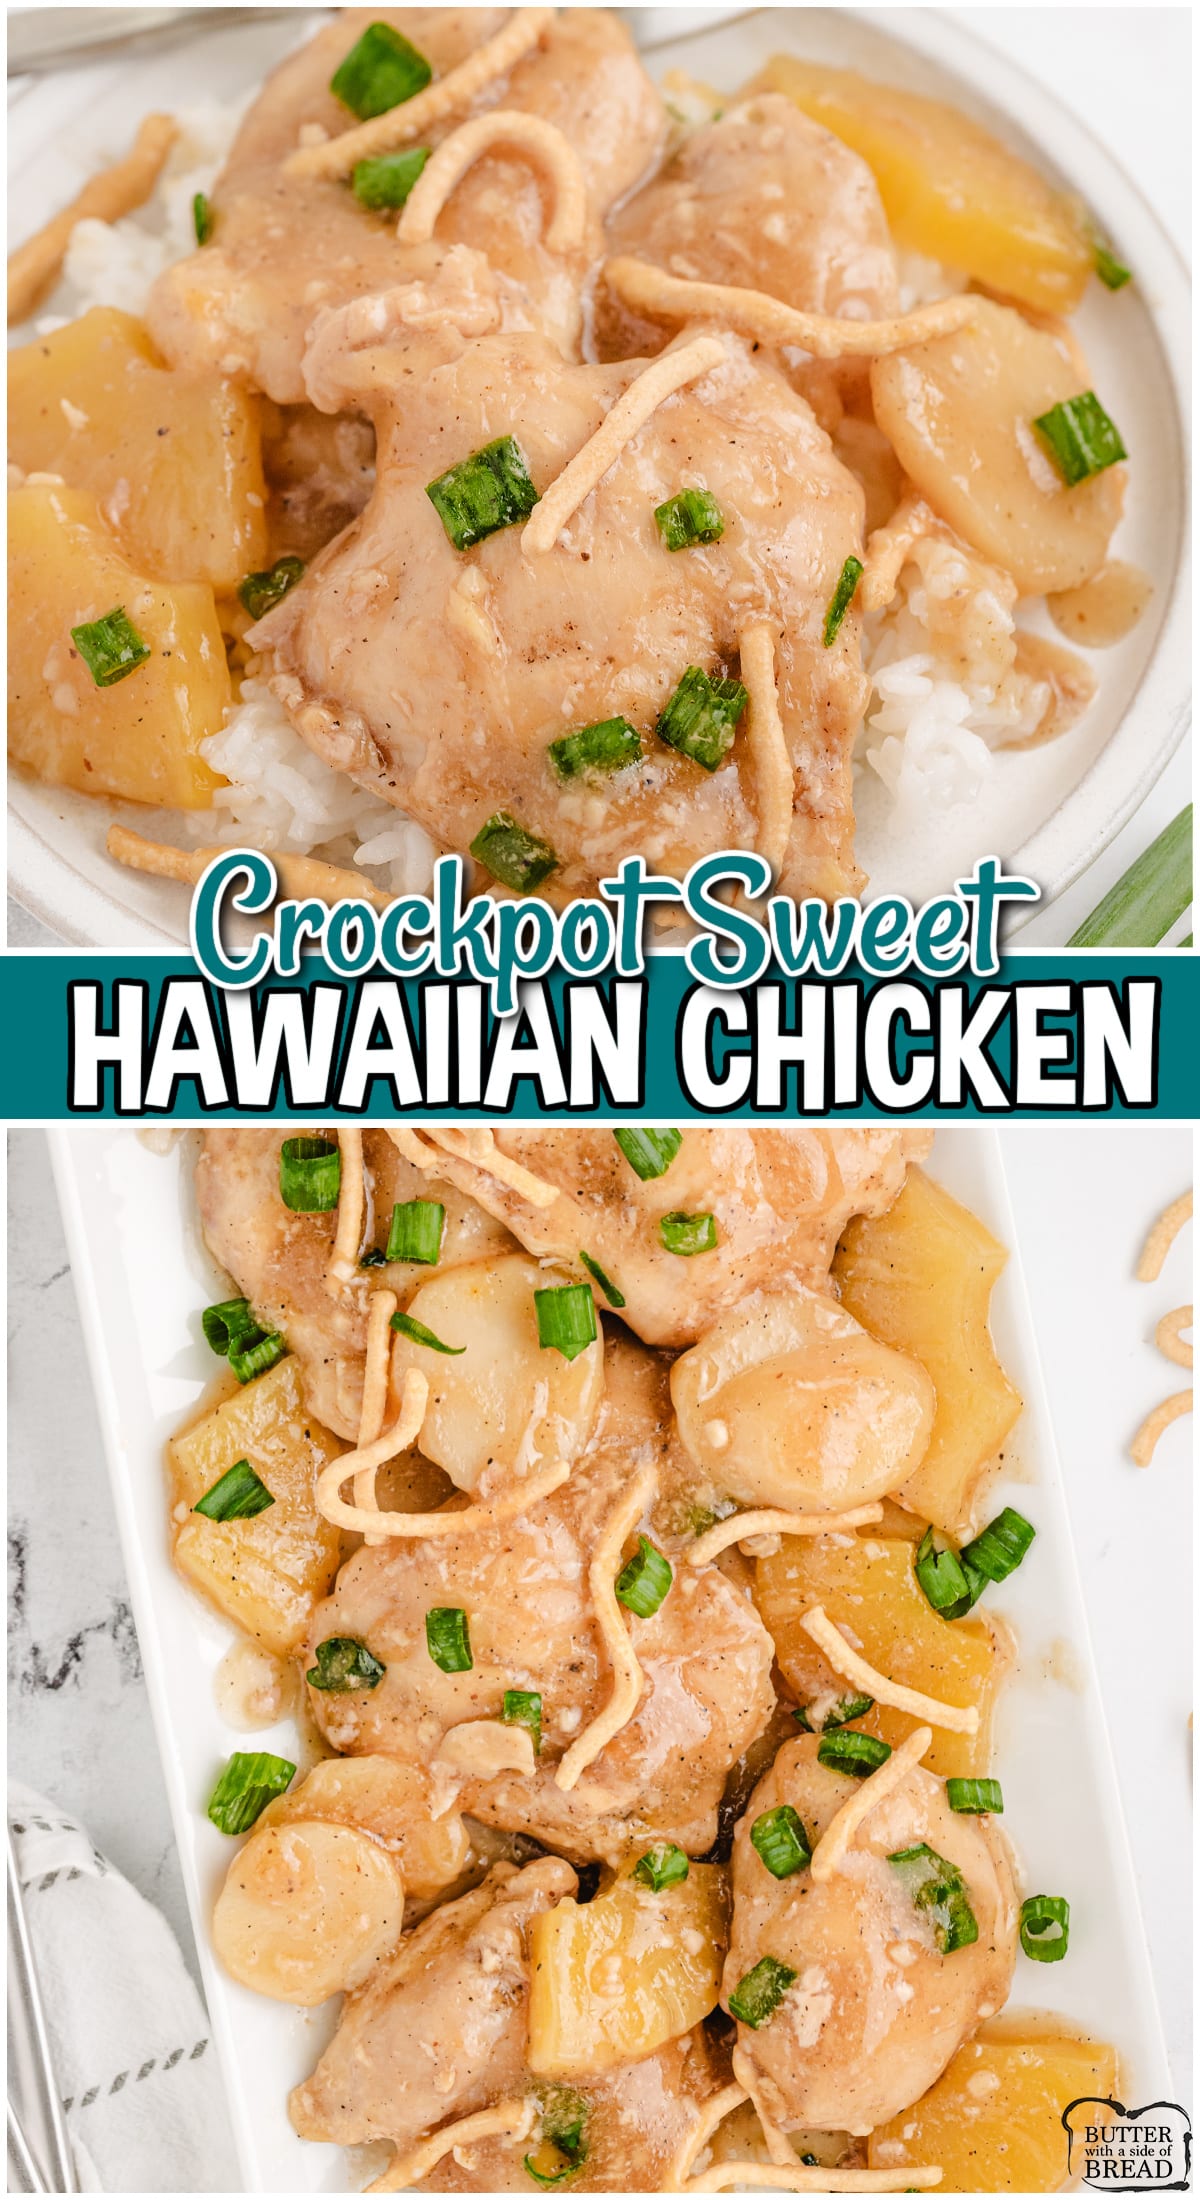 Sweet Hawaiian Crockpot Chicken is made with tender chicken & pineapple slow cooked in a savory sauce that's perfect topped with chow mein noodles! Flavorful chicken dinner everyone loves!